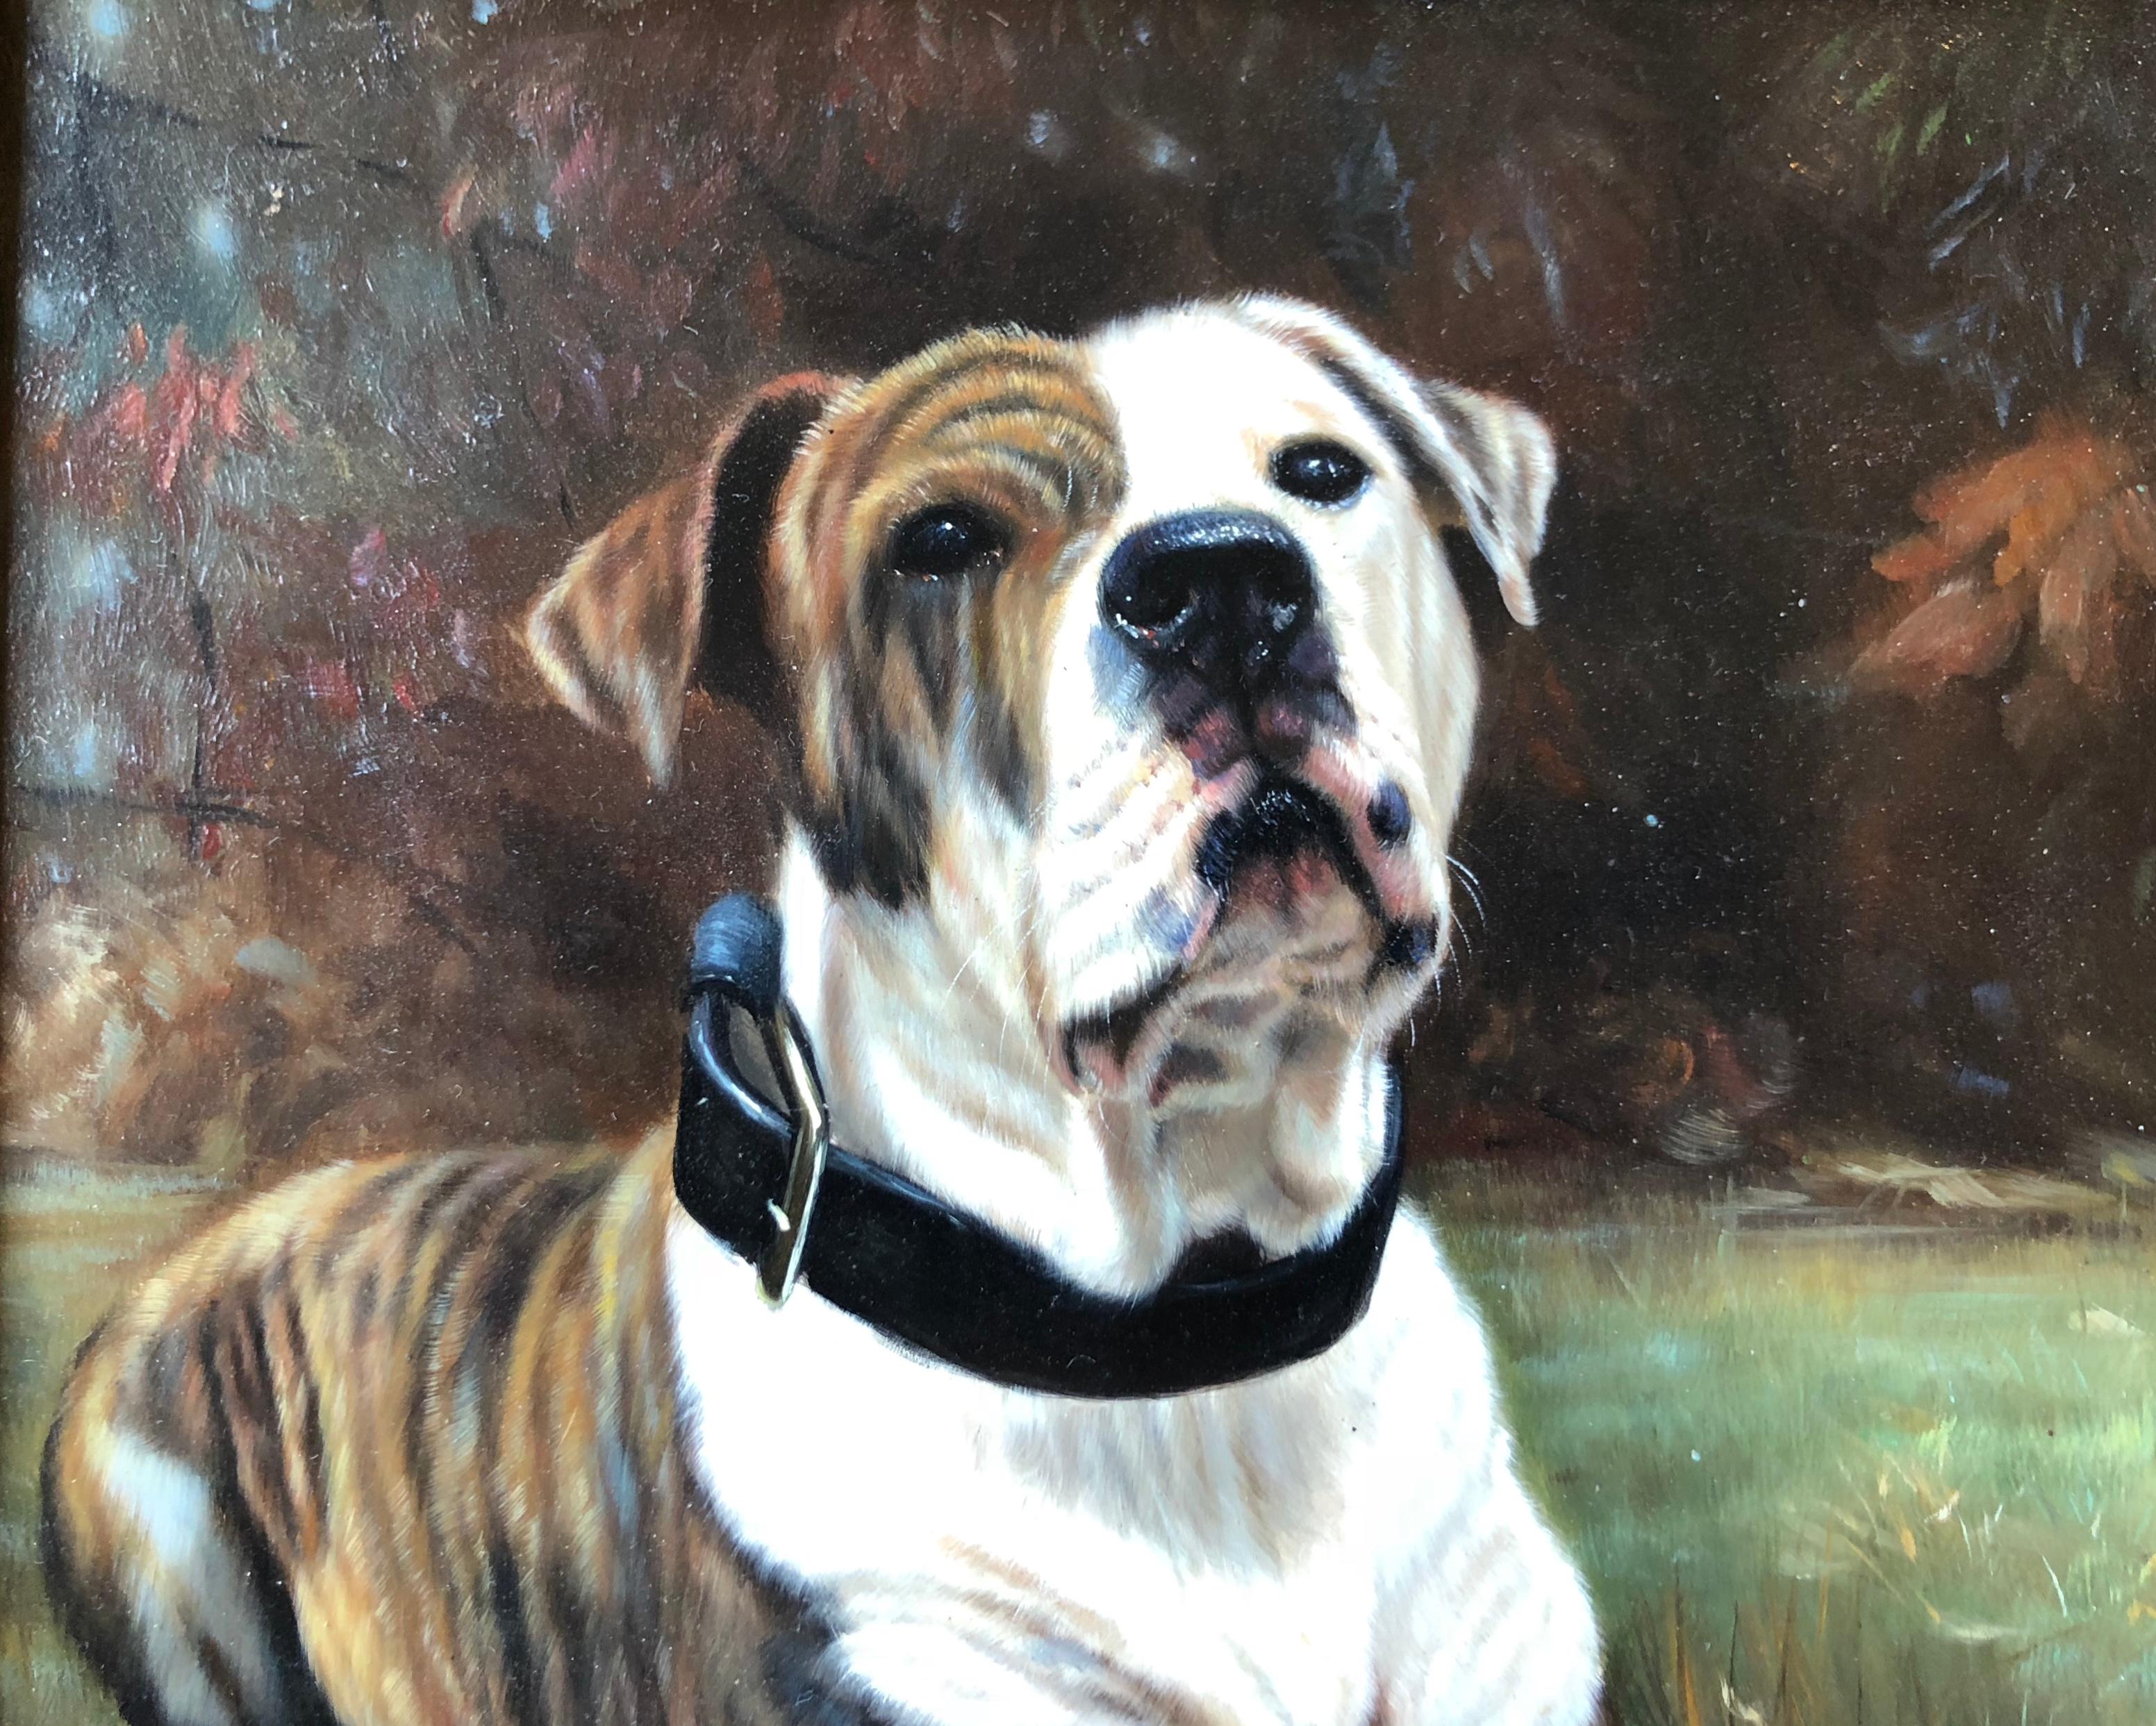 Exquisitely rendered, original oil on board, signed estate painting by French artist, Girard, depicts an American Bulldog reclining on grass, with sparkling eyes, an alert expression and a lush, full coat with tiny, individual hairs creating a